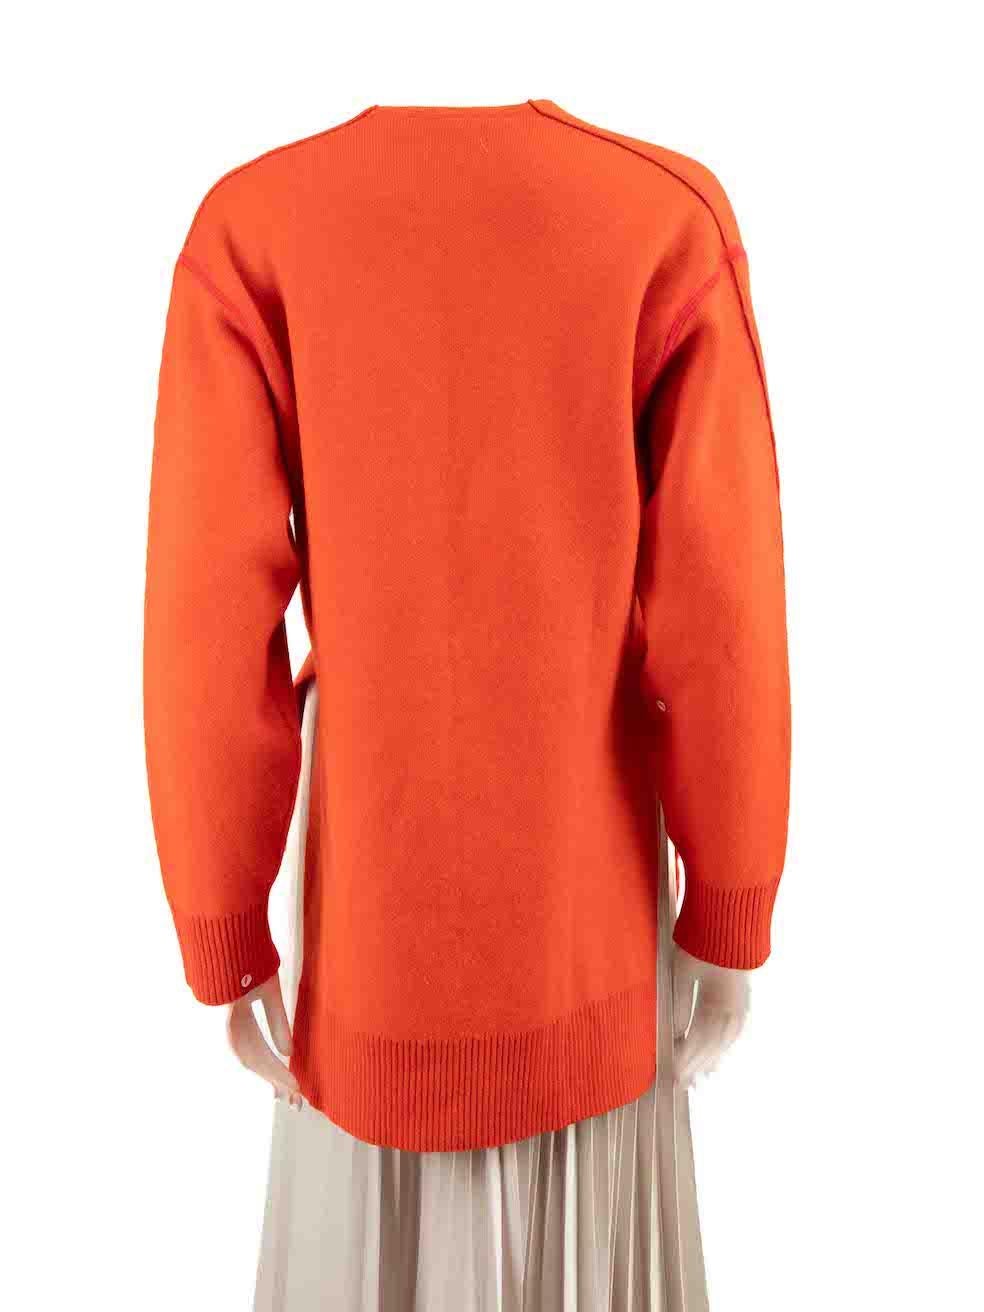 Proenza Schouler Orange Wool V-Neck Knit Sweater Size XS In Good Condition For Sale In London, GB